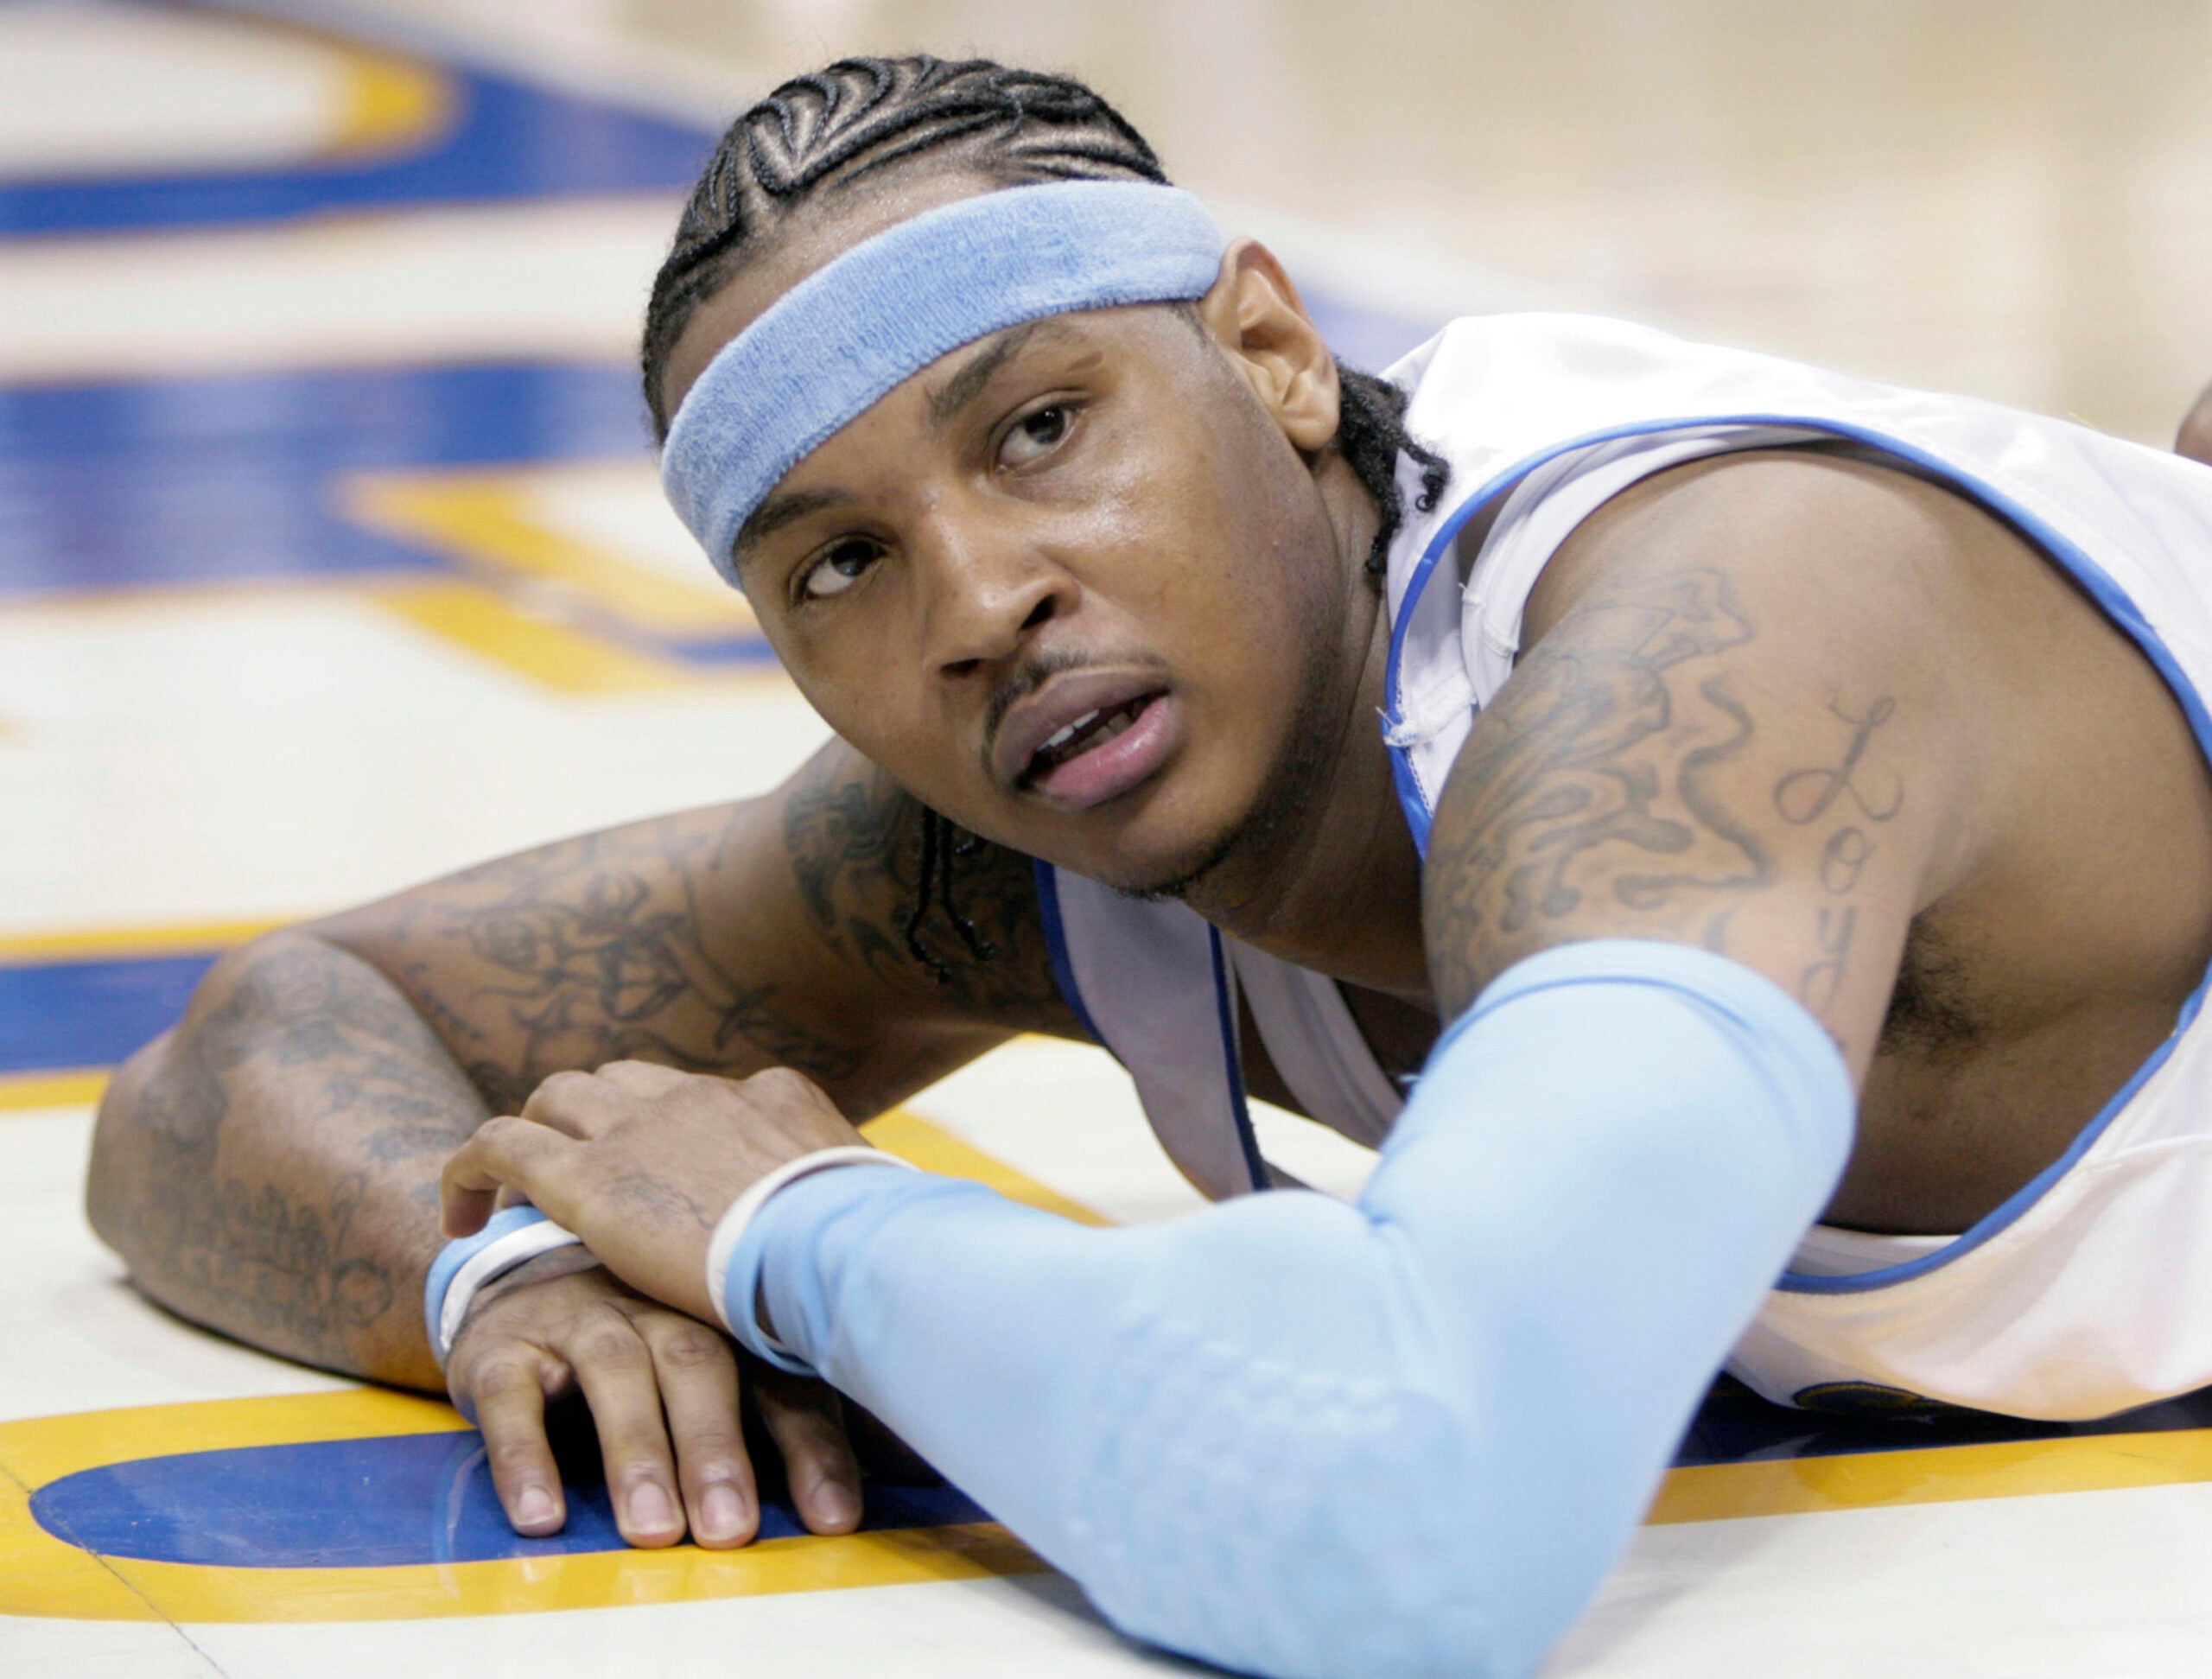 Denver Nuggets forward Carmelo Anthony looks up from the floor after getting called for a foul in the fourth quarter of game 3 of the NBA Western Conference playoff series against the San Antonio Spurs in Denver on April 28, 2007.